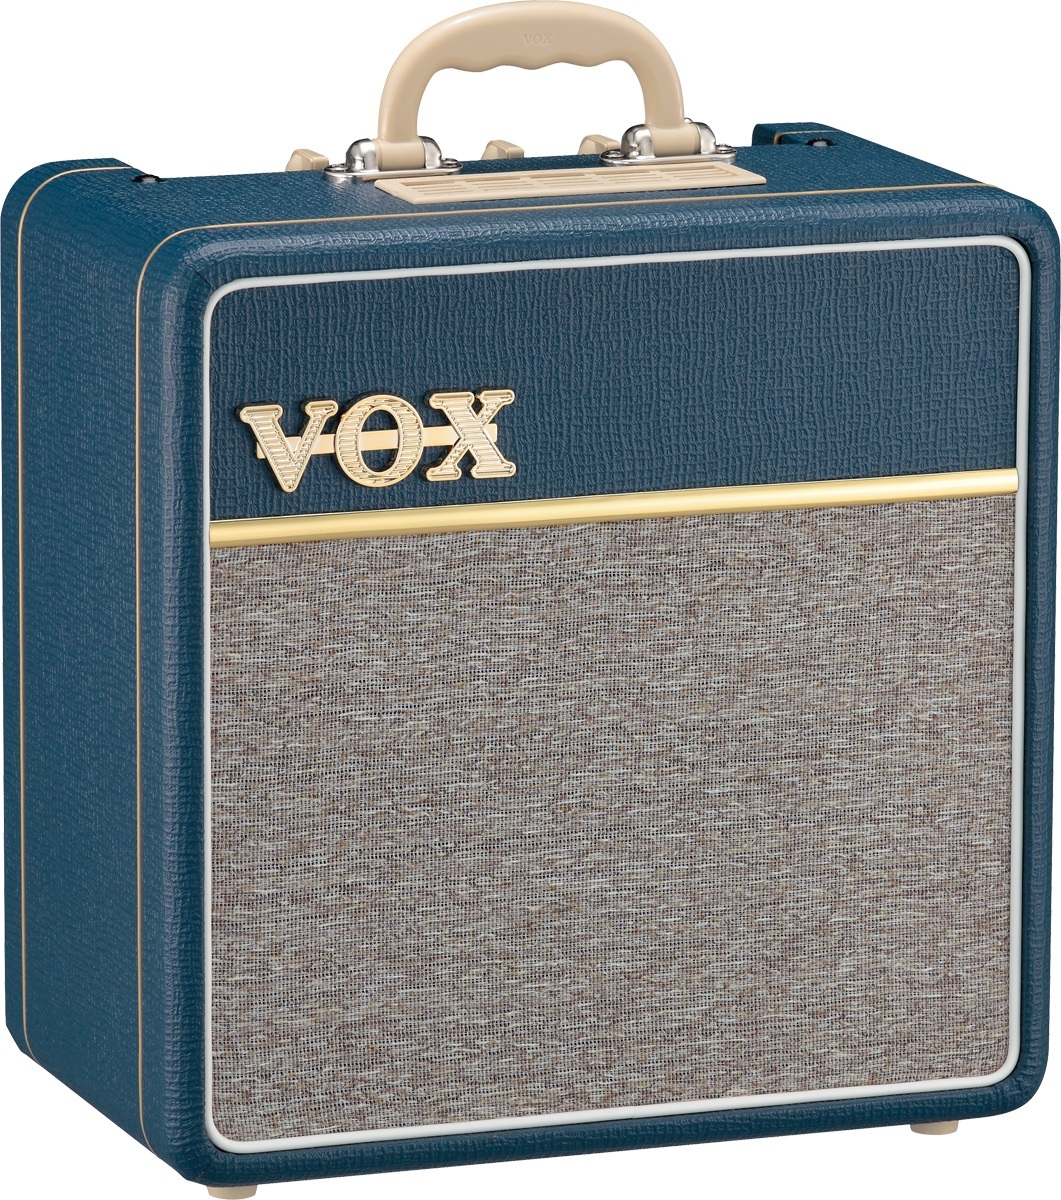 Vox Ac4c1 - Blue - Electric guitar combo amp - Main picture